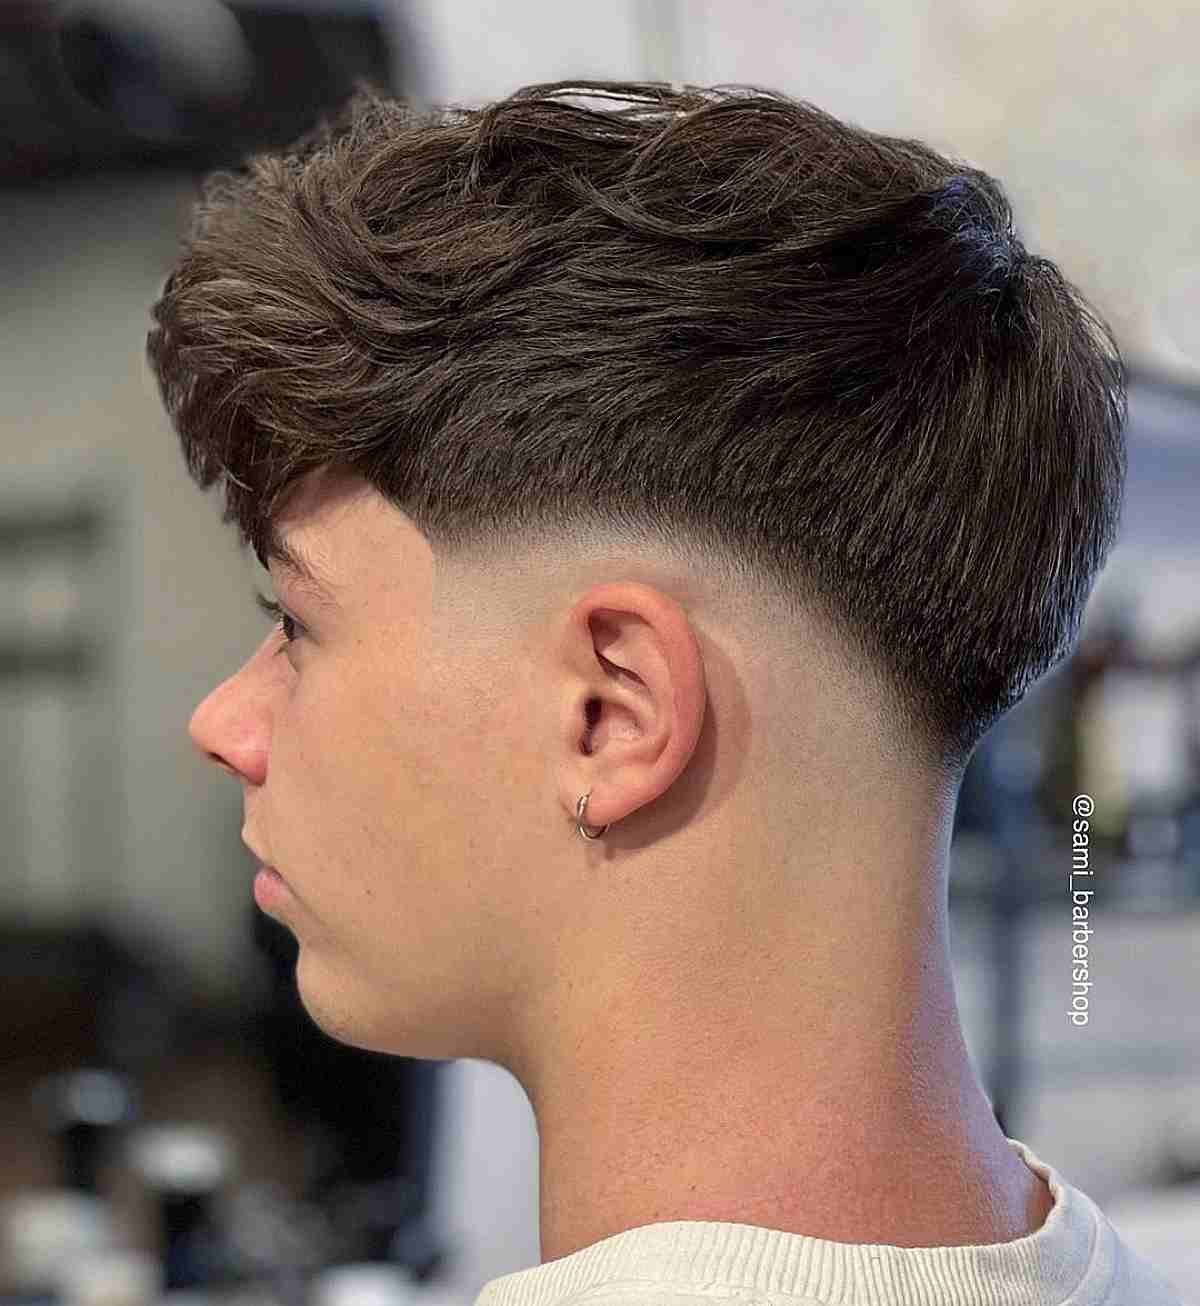 Classic Low Fade with Bangs for Men